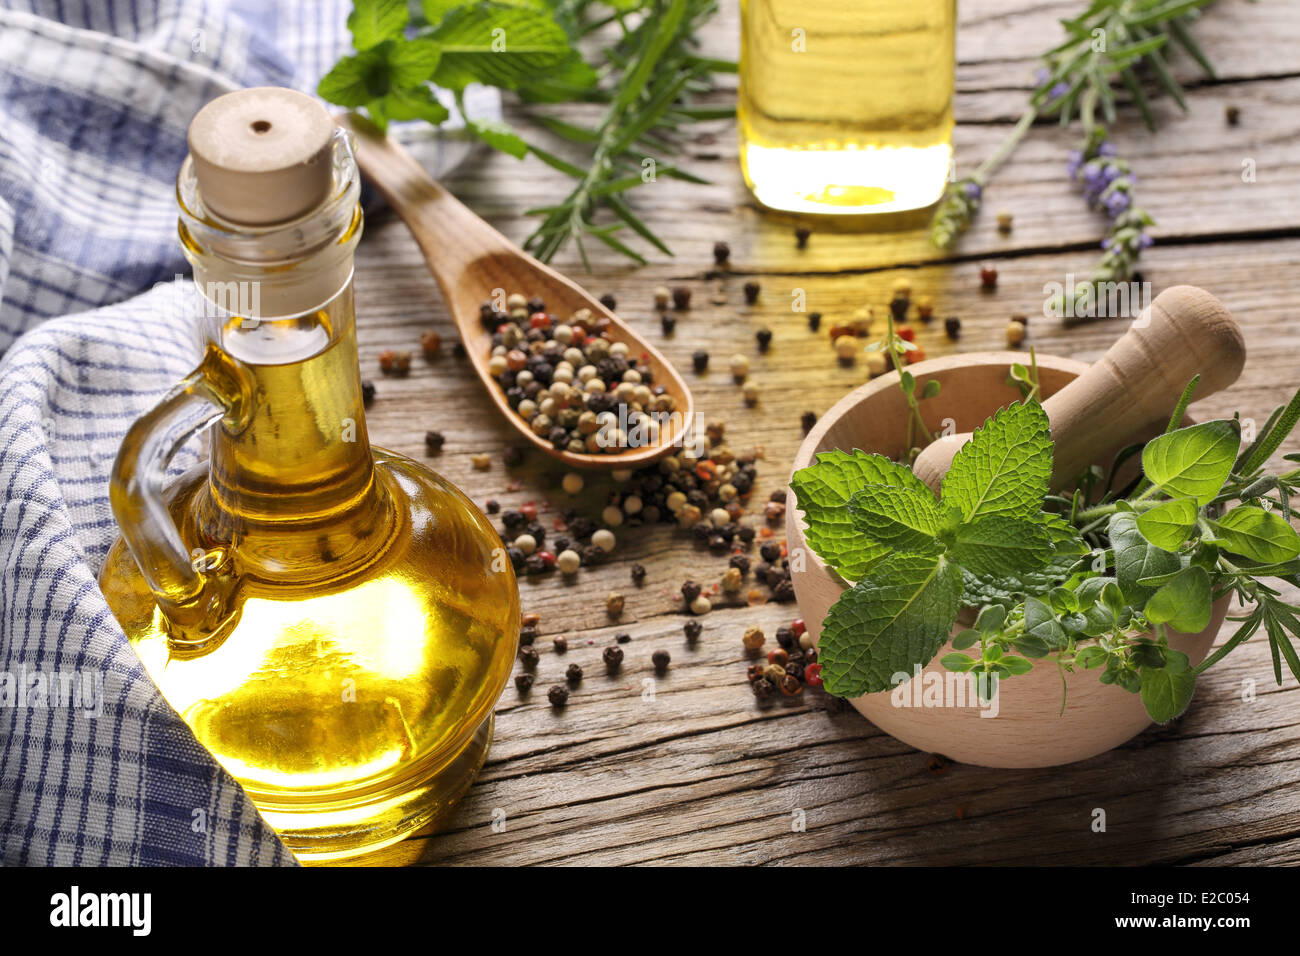 herbs and oil on wooden table Stock Photo